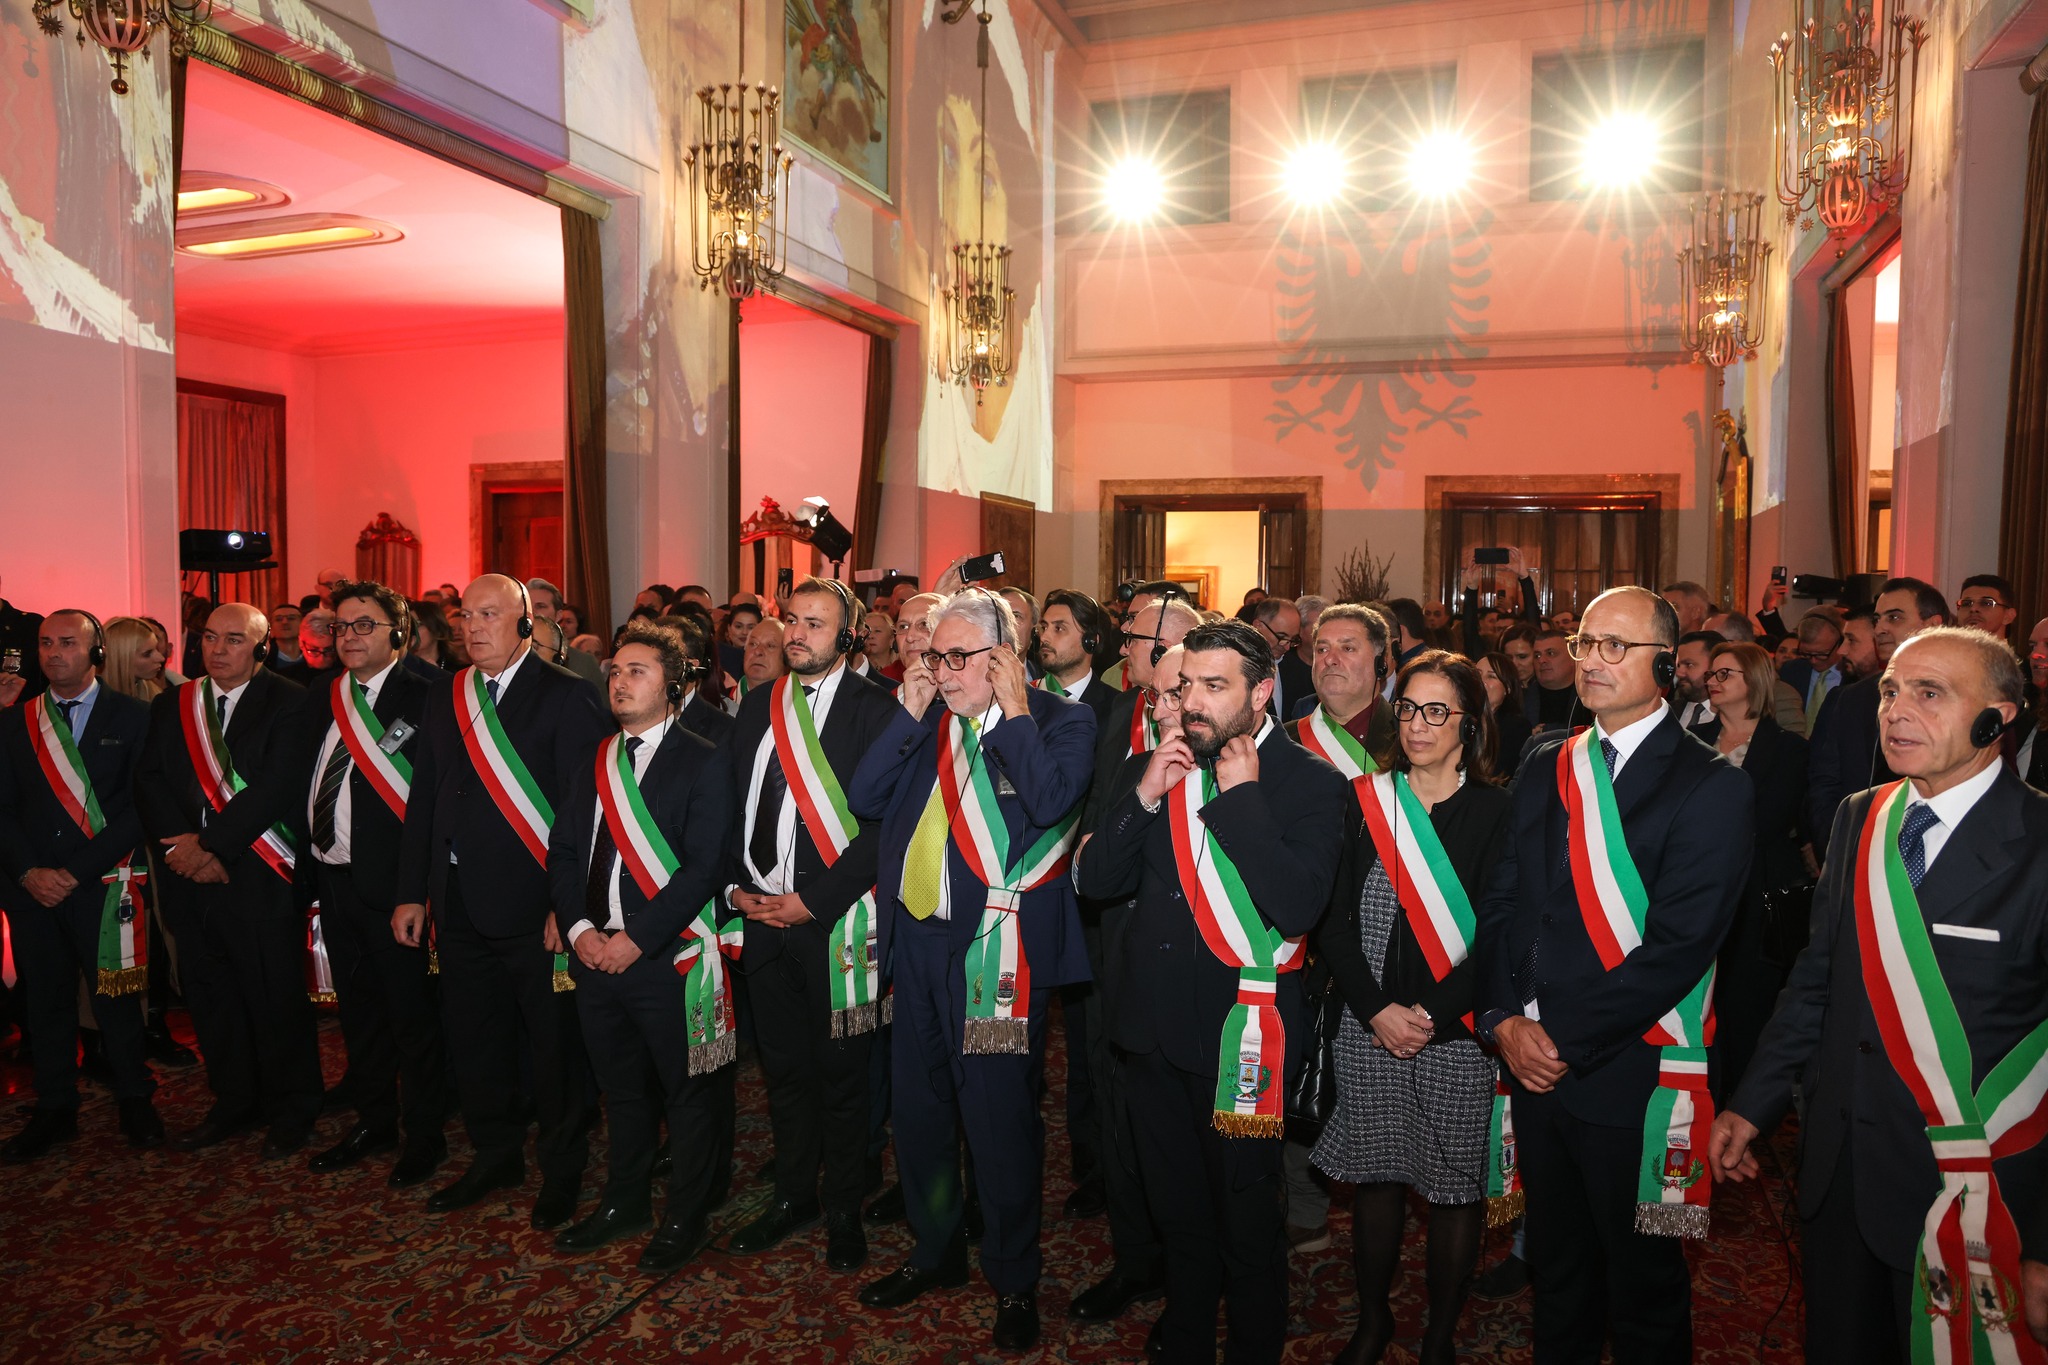 Reception of the Mayor of Tirana on the eve of the 111th anniversary of Independence